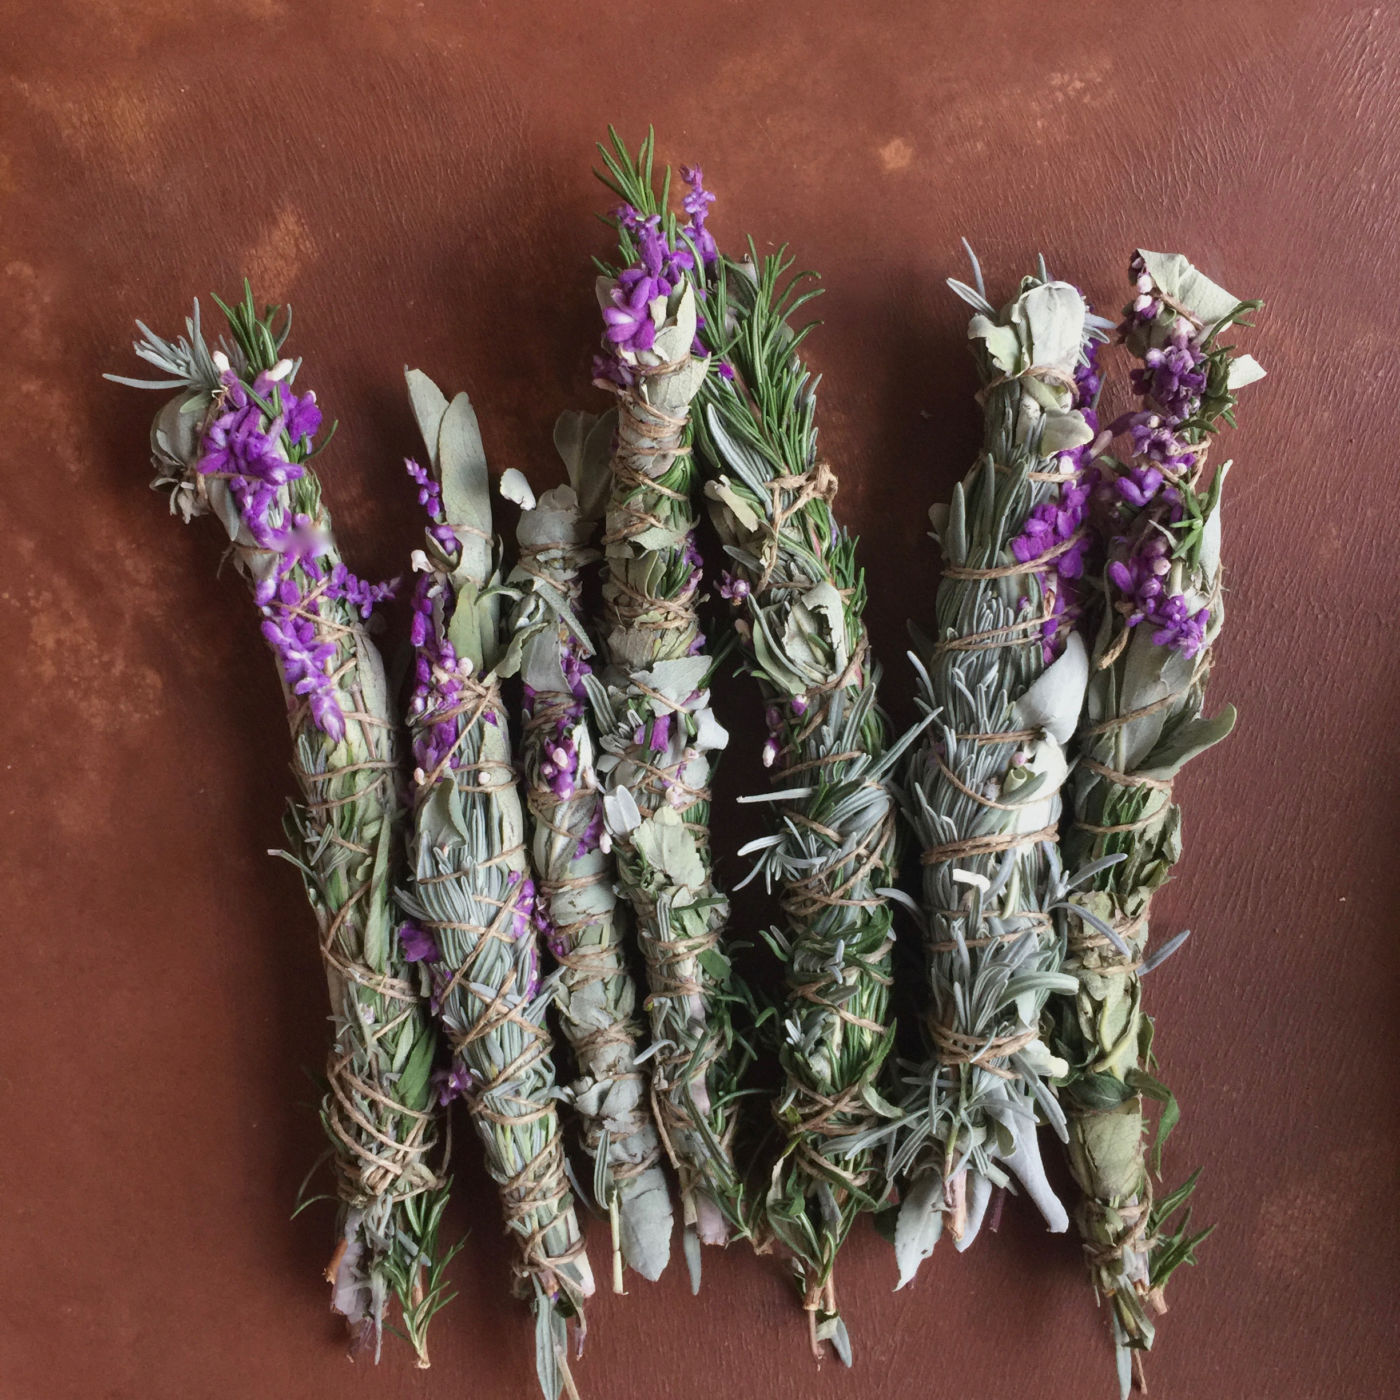 Homegrown aromatic smoke sticks prepared from white sage, lavender, rosemary, and Mexican sage.